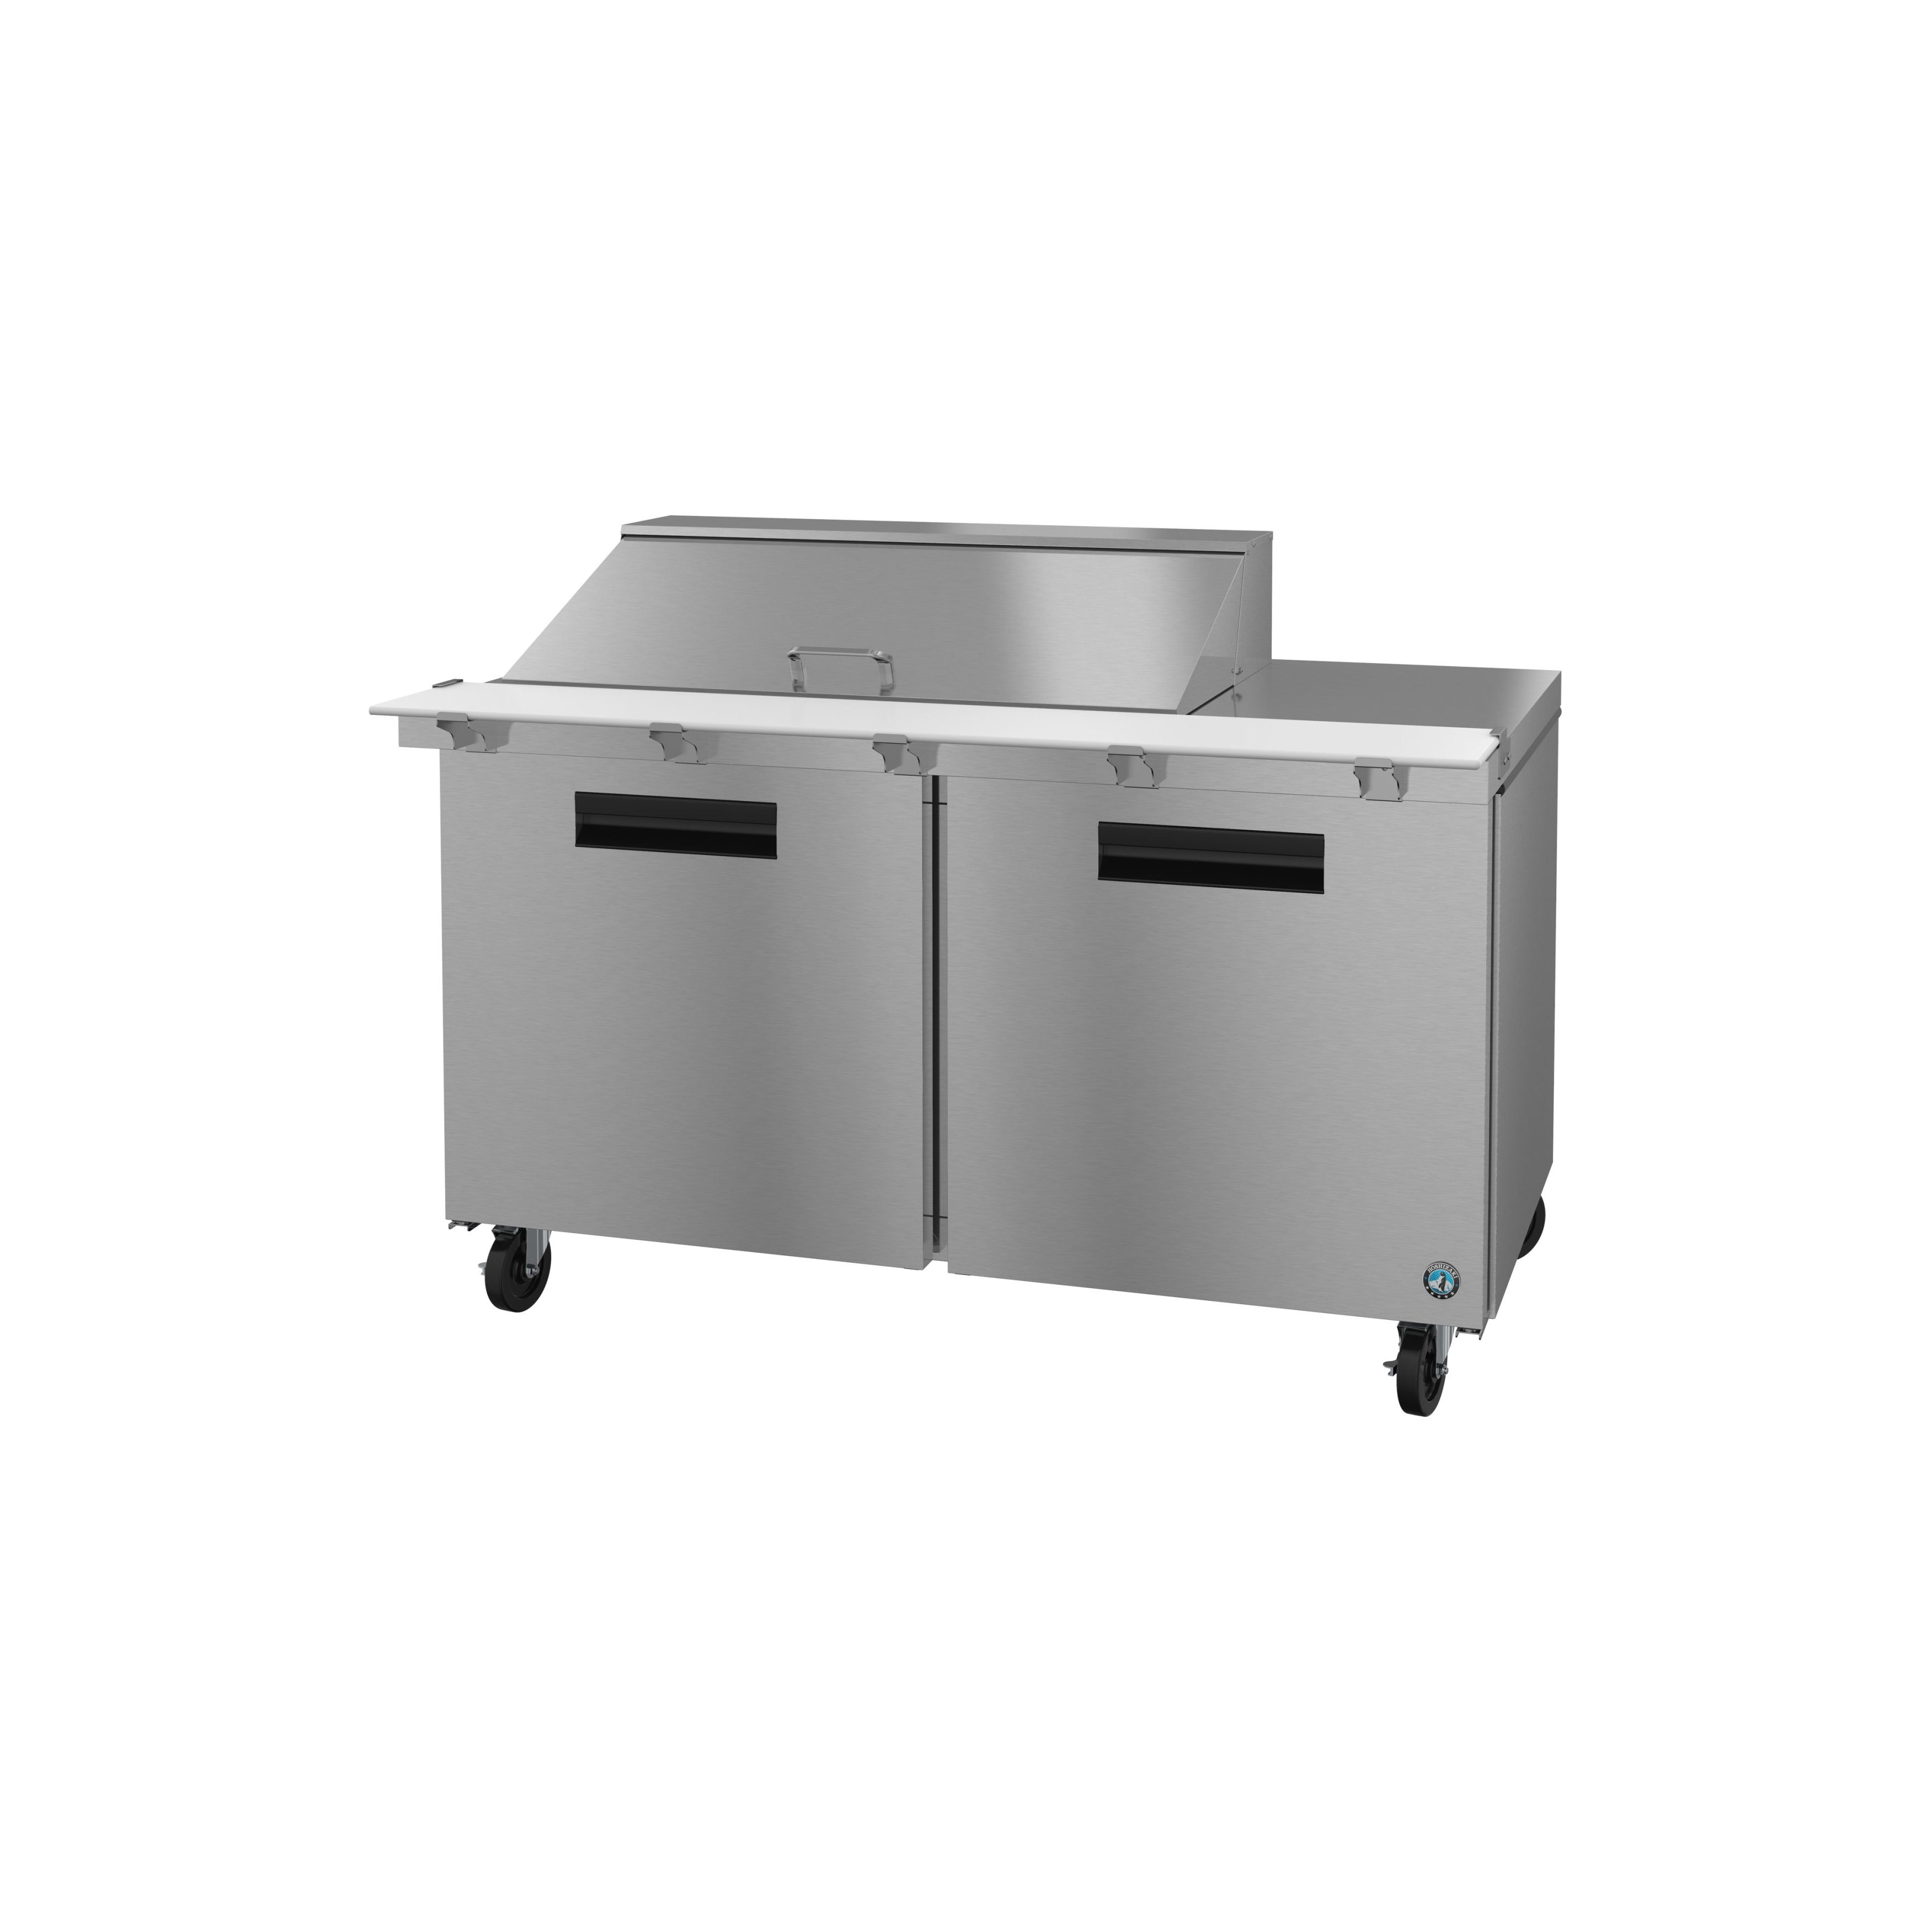 Hoshizaki - SR60B-18M, Commercial 60" Two Section Mega Top Prep Table Refrigerator Stainless Doors 14.8cu.f.t